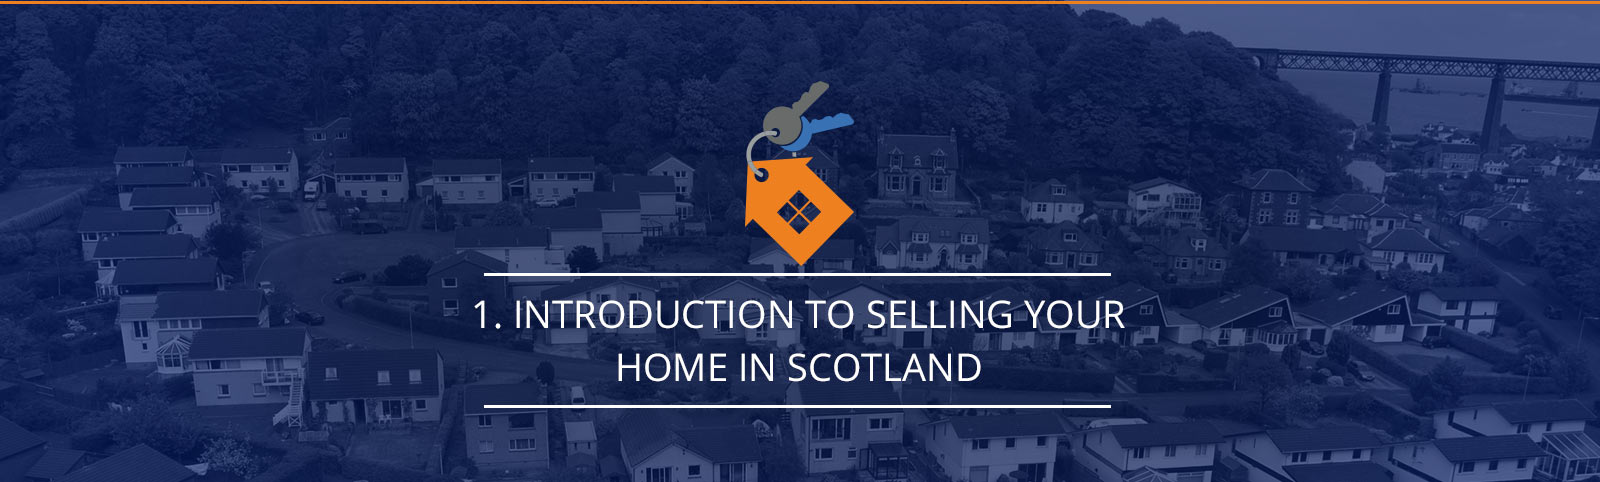 Introduction to selling your home in Scotland